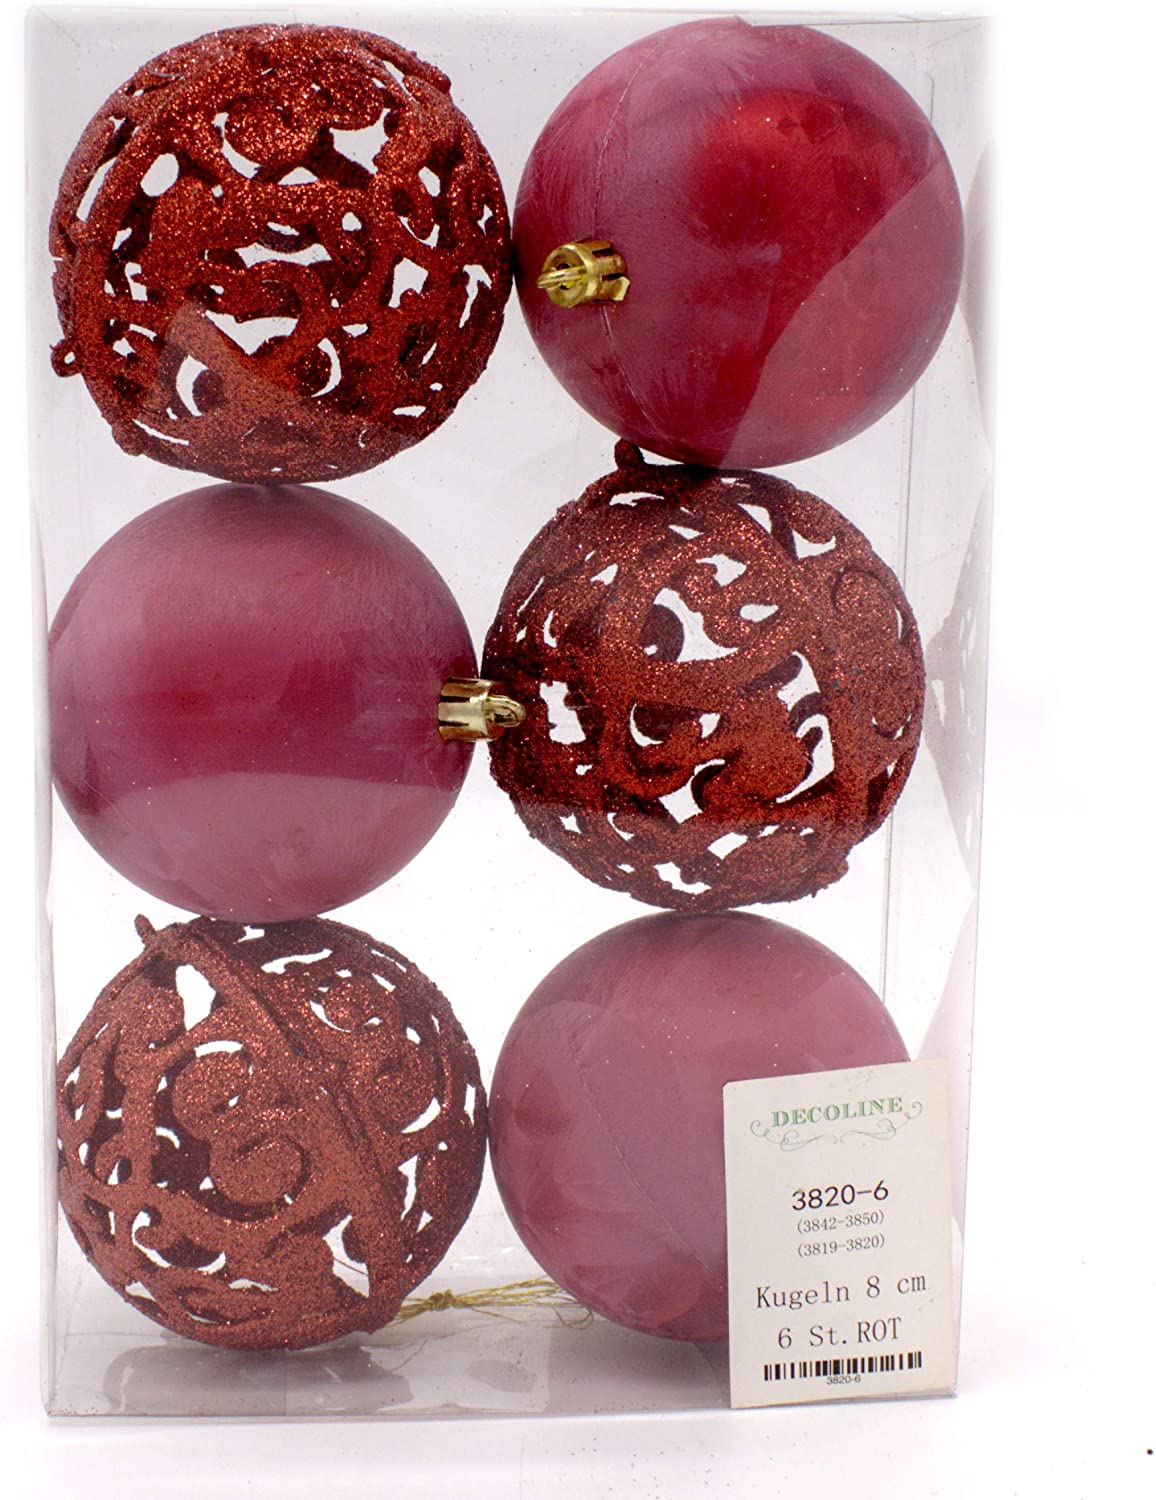 Decoline Ball 8 cm Red Pack of 6